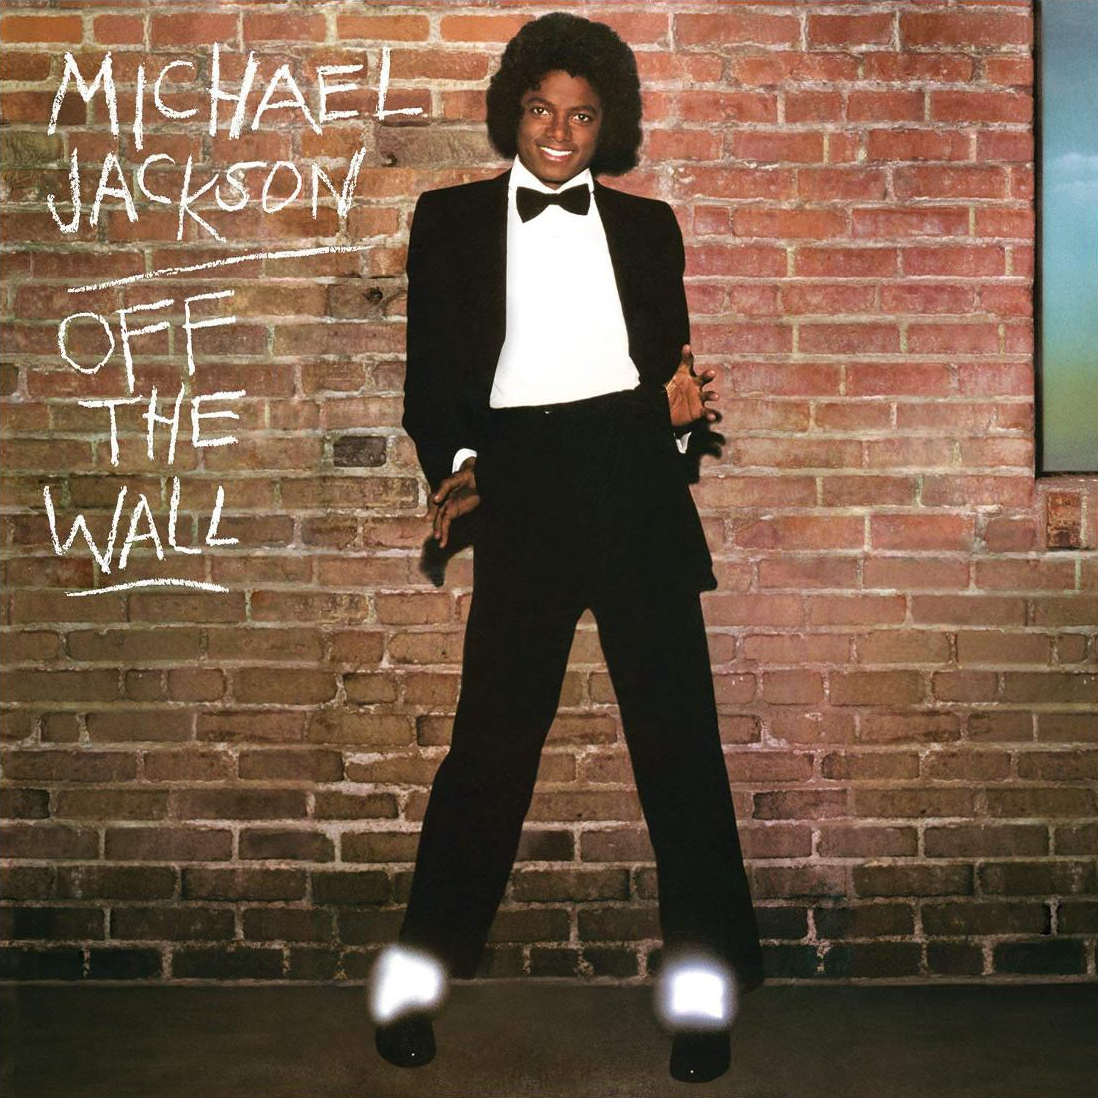 audio review : Off The Wall ( album ) ... Michael Jackson